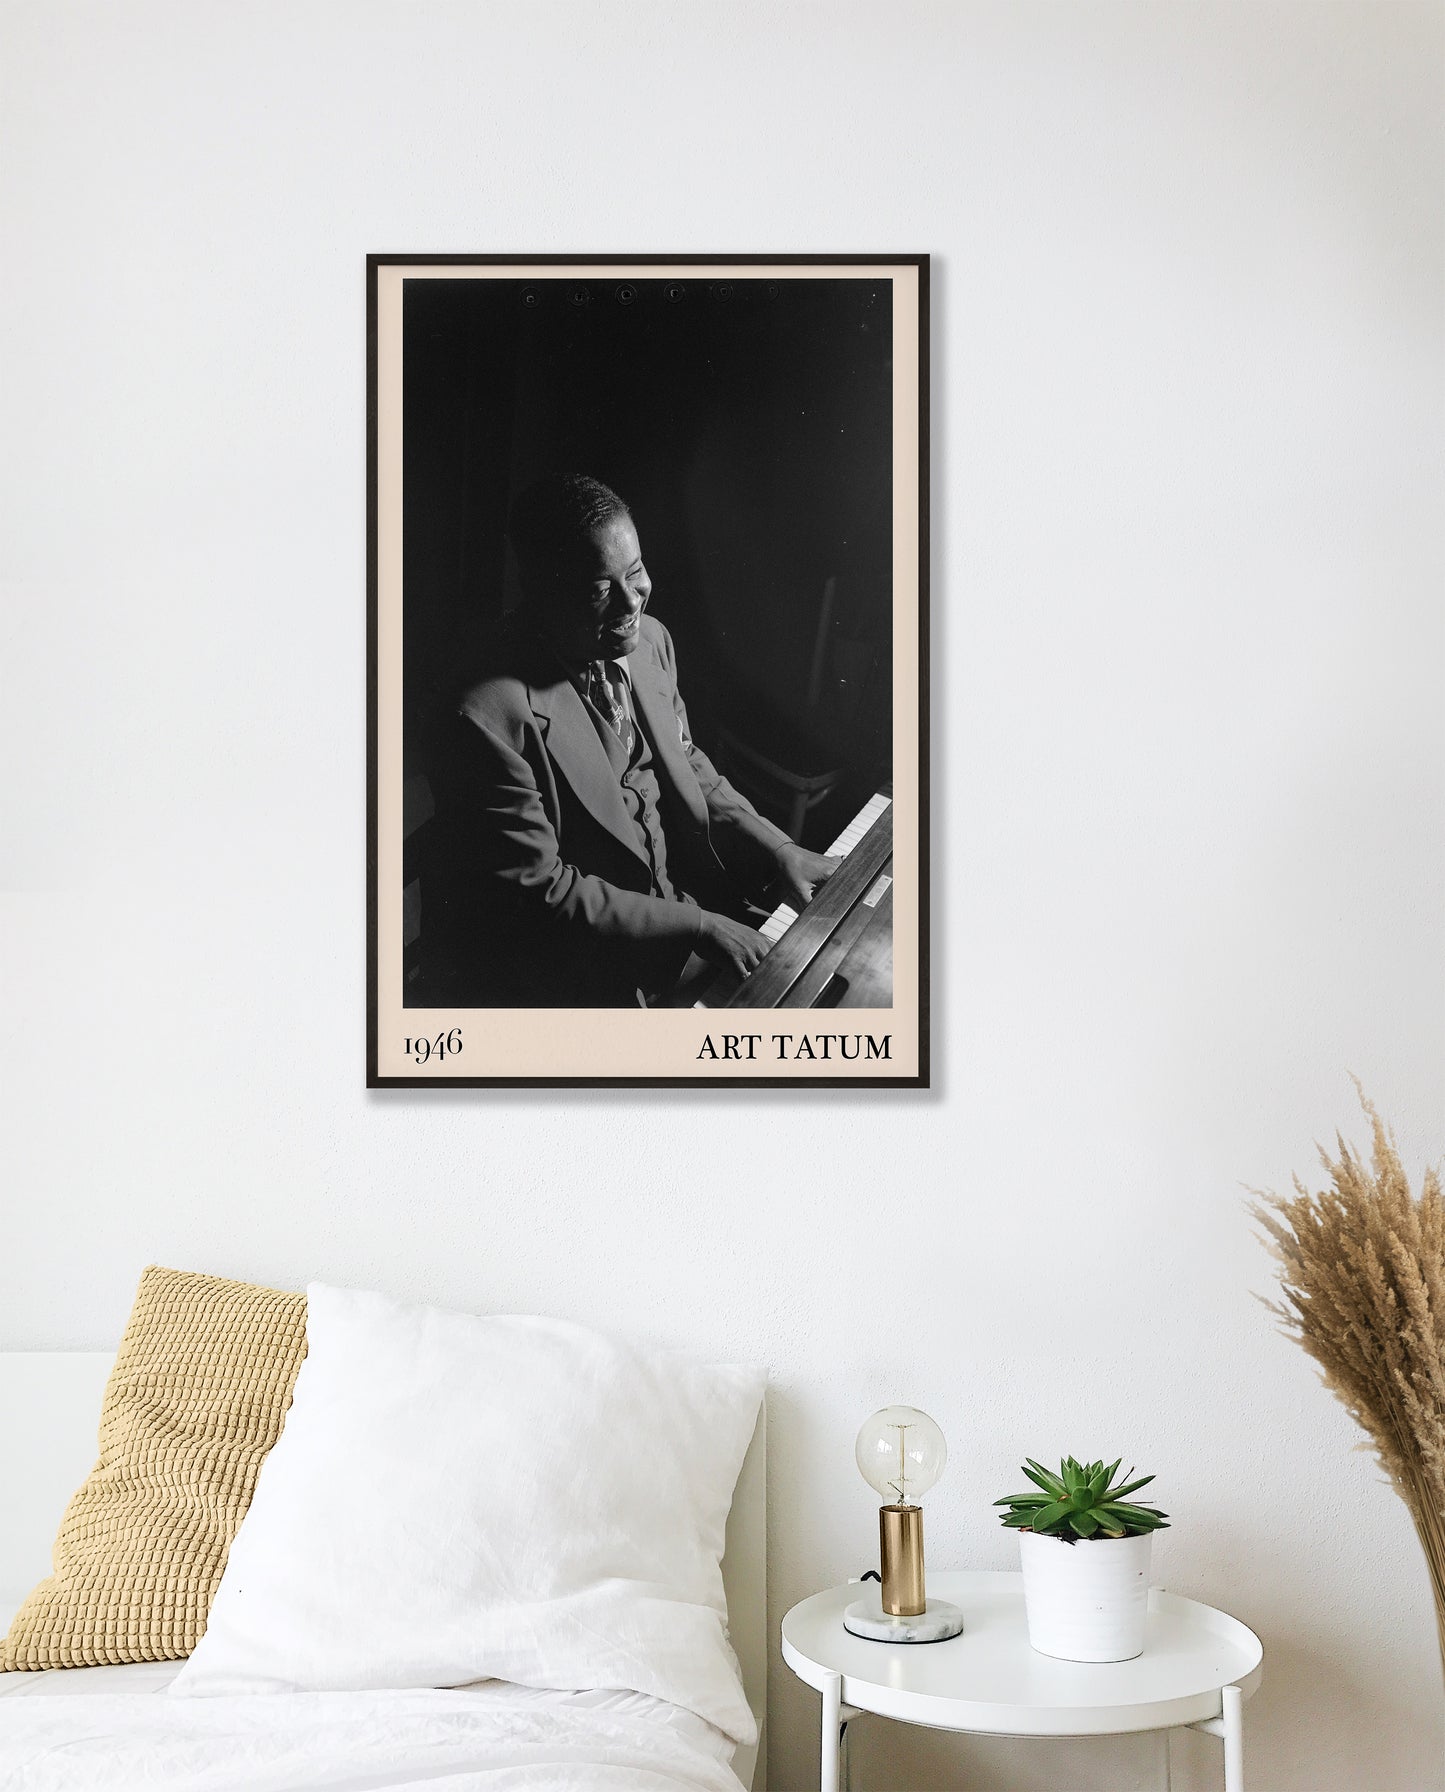 1946 photograph of Art Tatum crafted into a cool framed music print. The poster has an off-white border and a thin black frame. The poster is hanging on a white bedroom wall